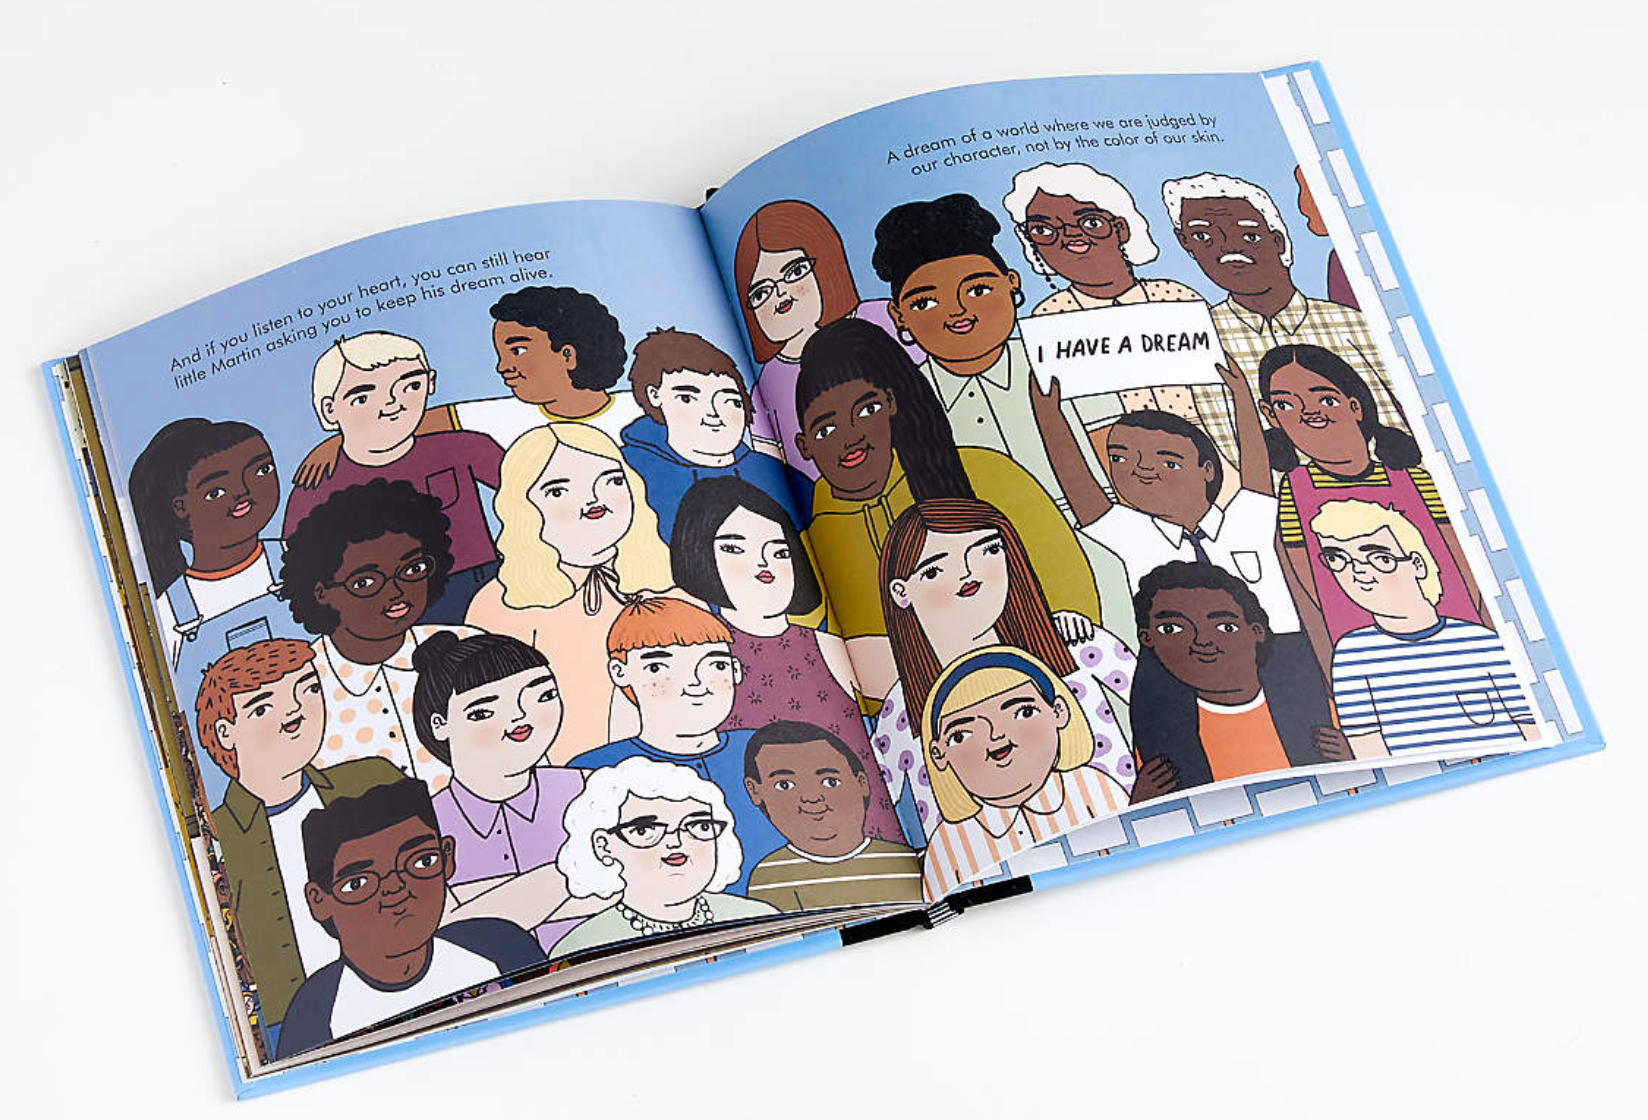 Inside page from ‘Little People, Big Dreams: Martin Luther King Jr.’